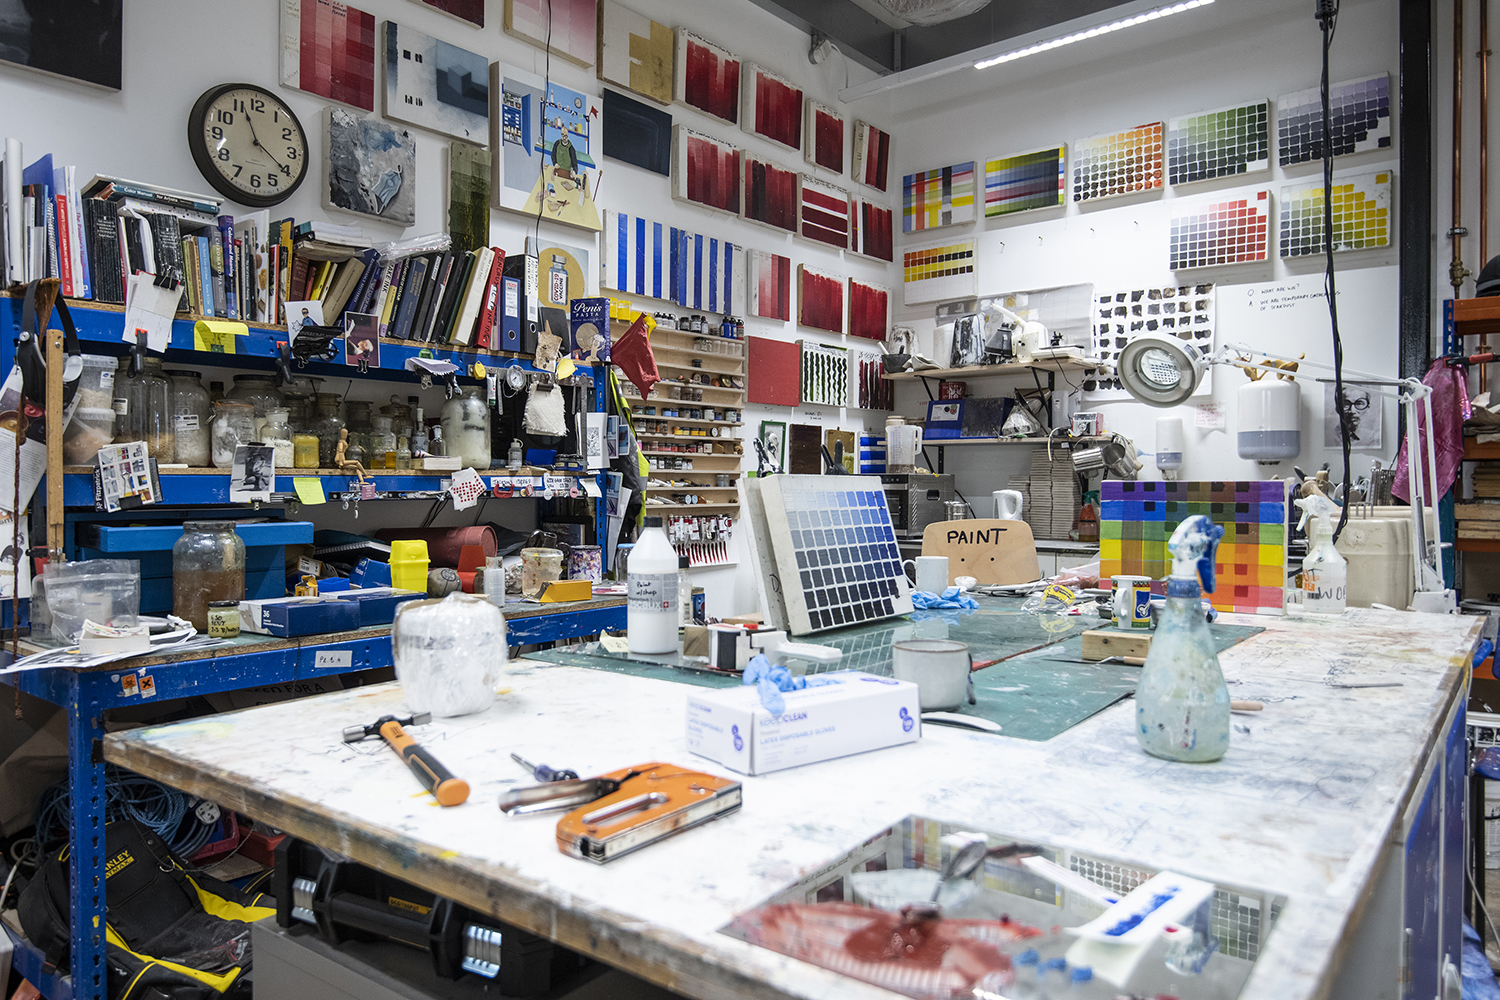 A room full of various paints and painting tools